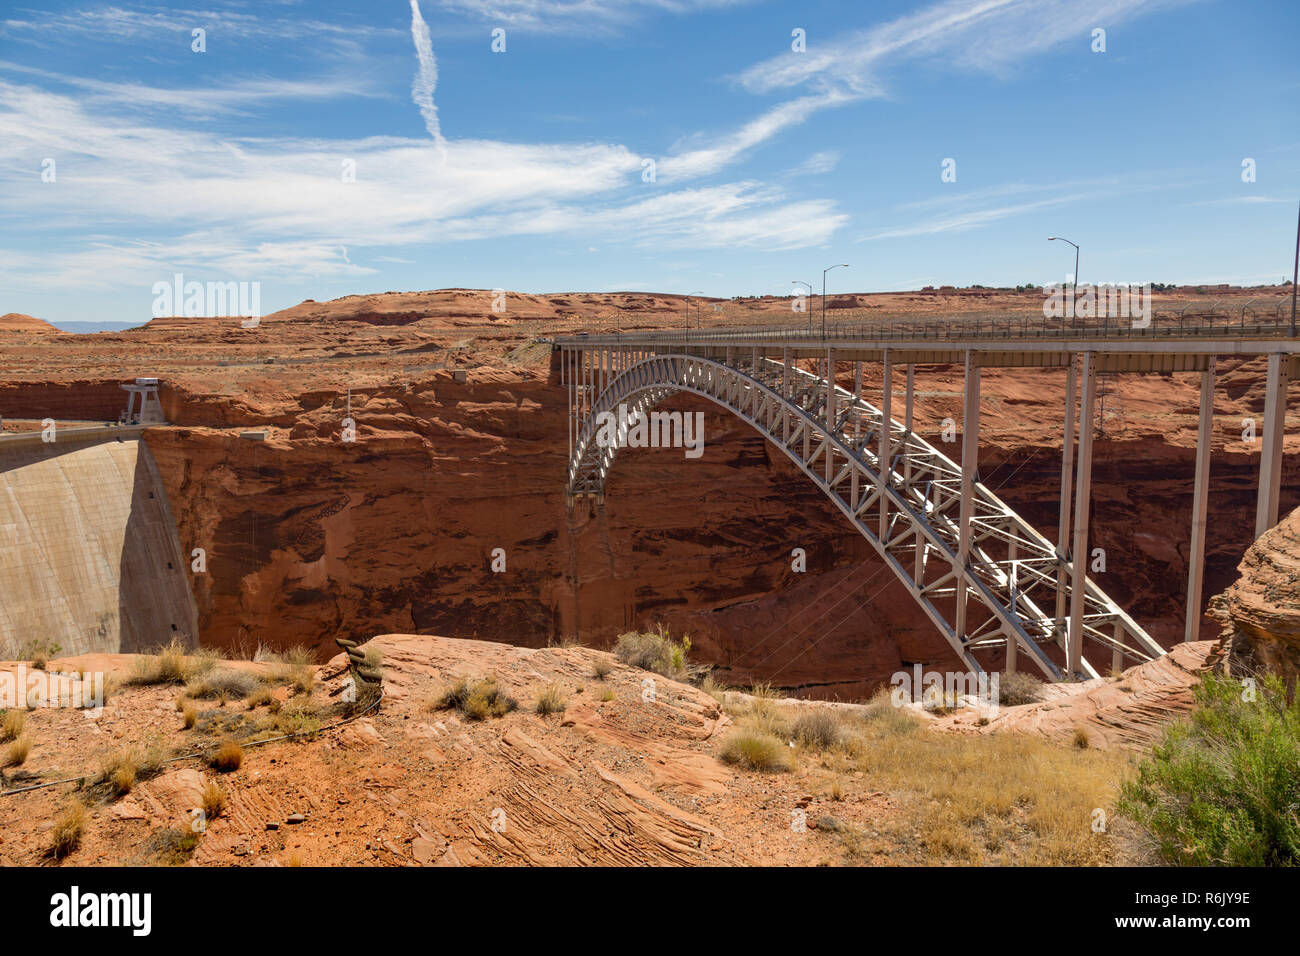 Glen Canyon Dam is a concrete arch-gravity dam on the Colorado River in northern Arizona, United States, near the town of Page. The 710-foot high dam Stock Photo